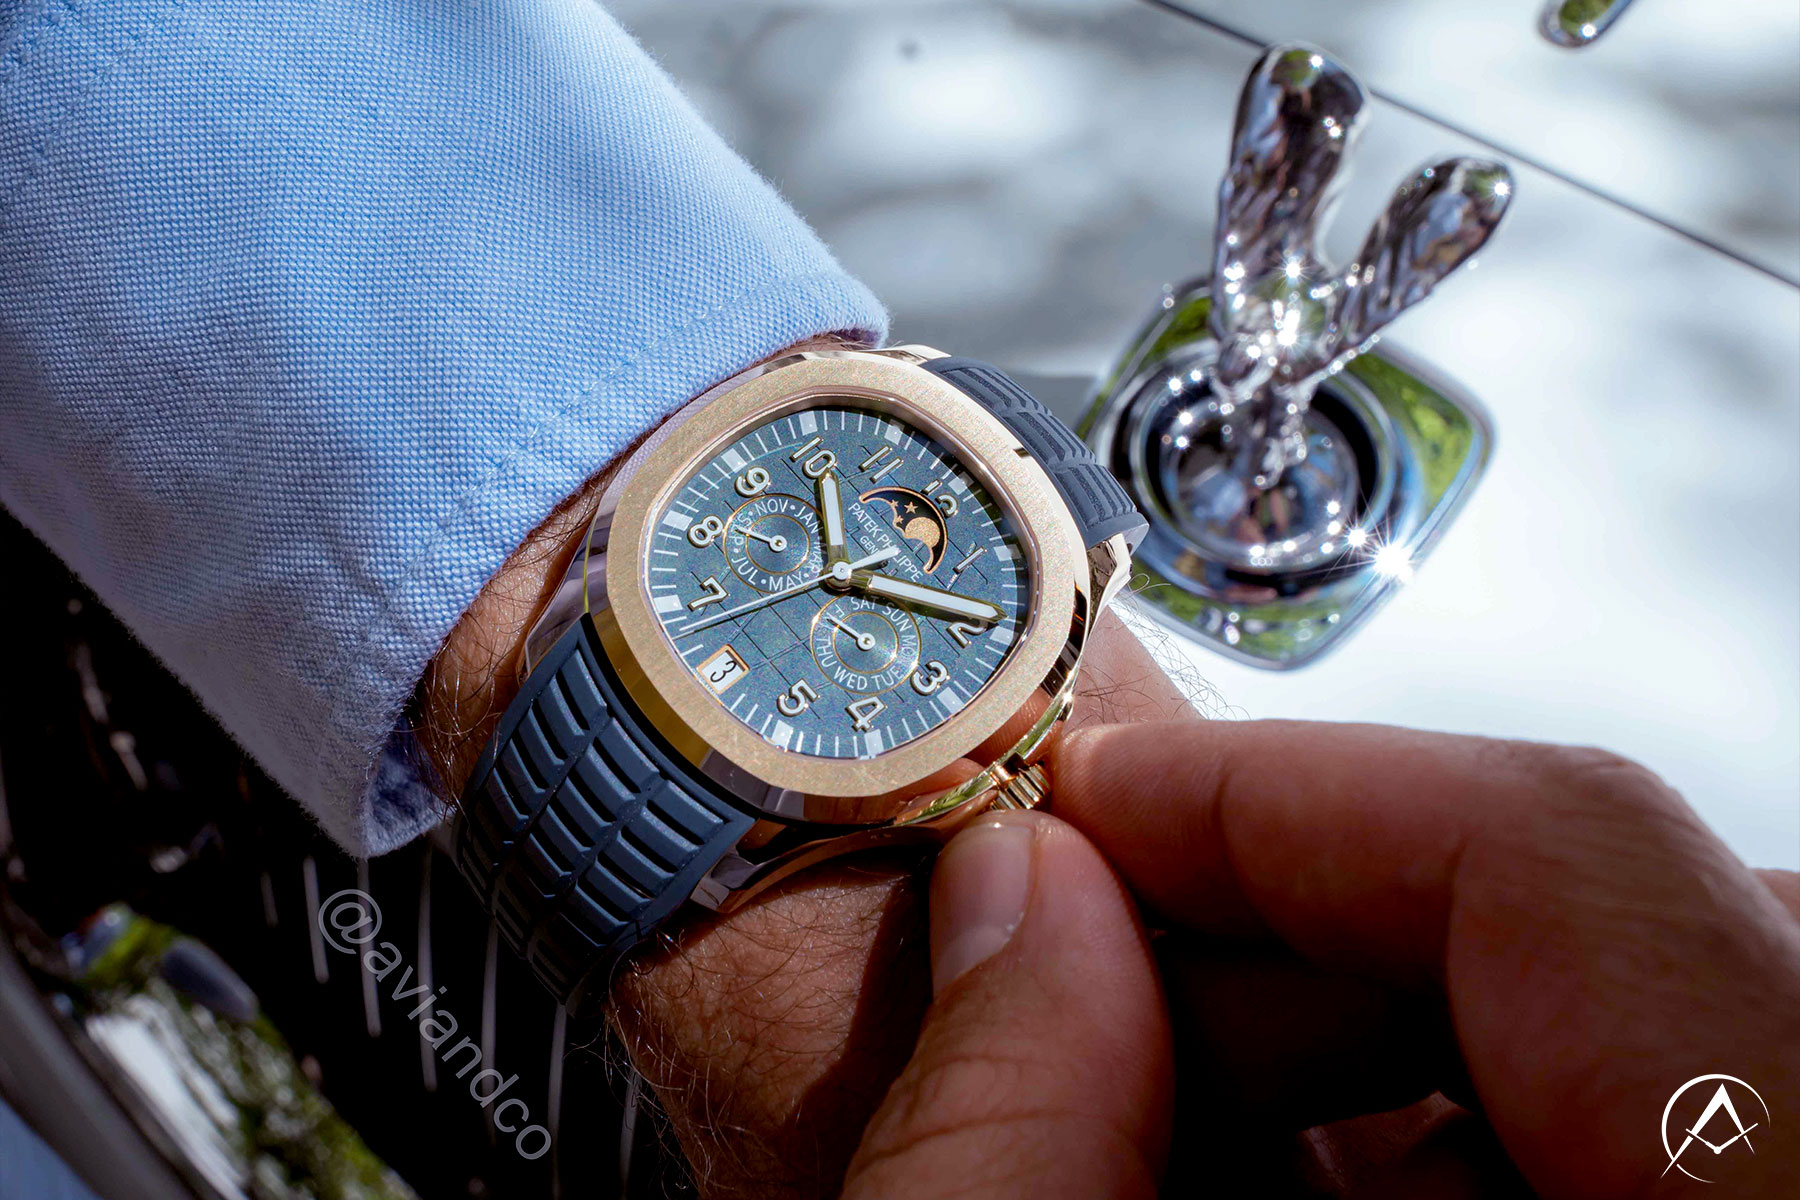 Man Wrist Wearing 18K Rose Gold Luxury Timepiece with Blue Dial, Arabic Numerals, Navy Blue Rubber Strap, Annual Calendar, and Date Function in Front of Silver Luxury Car.